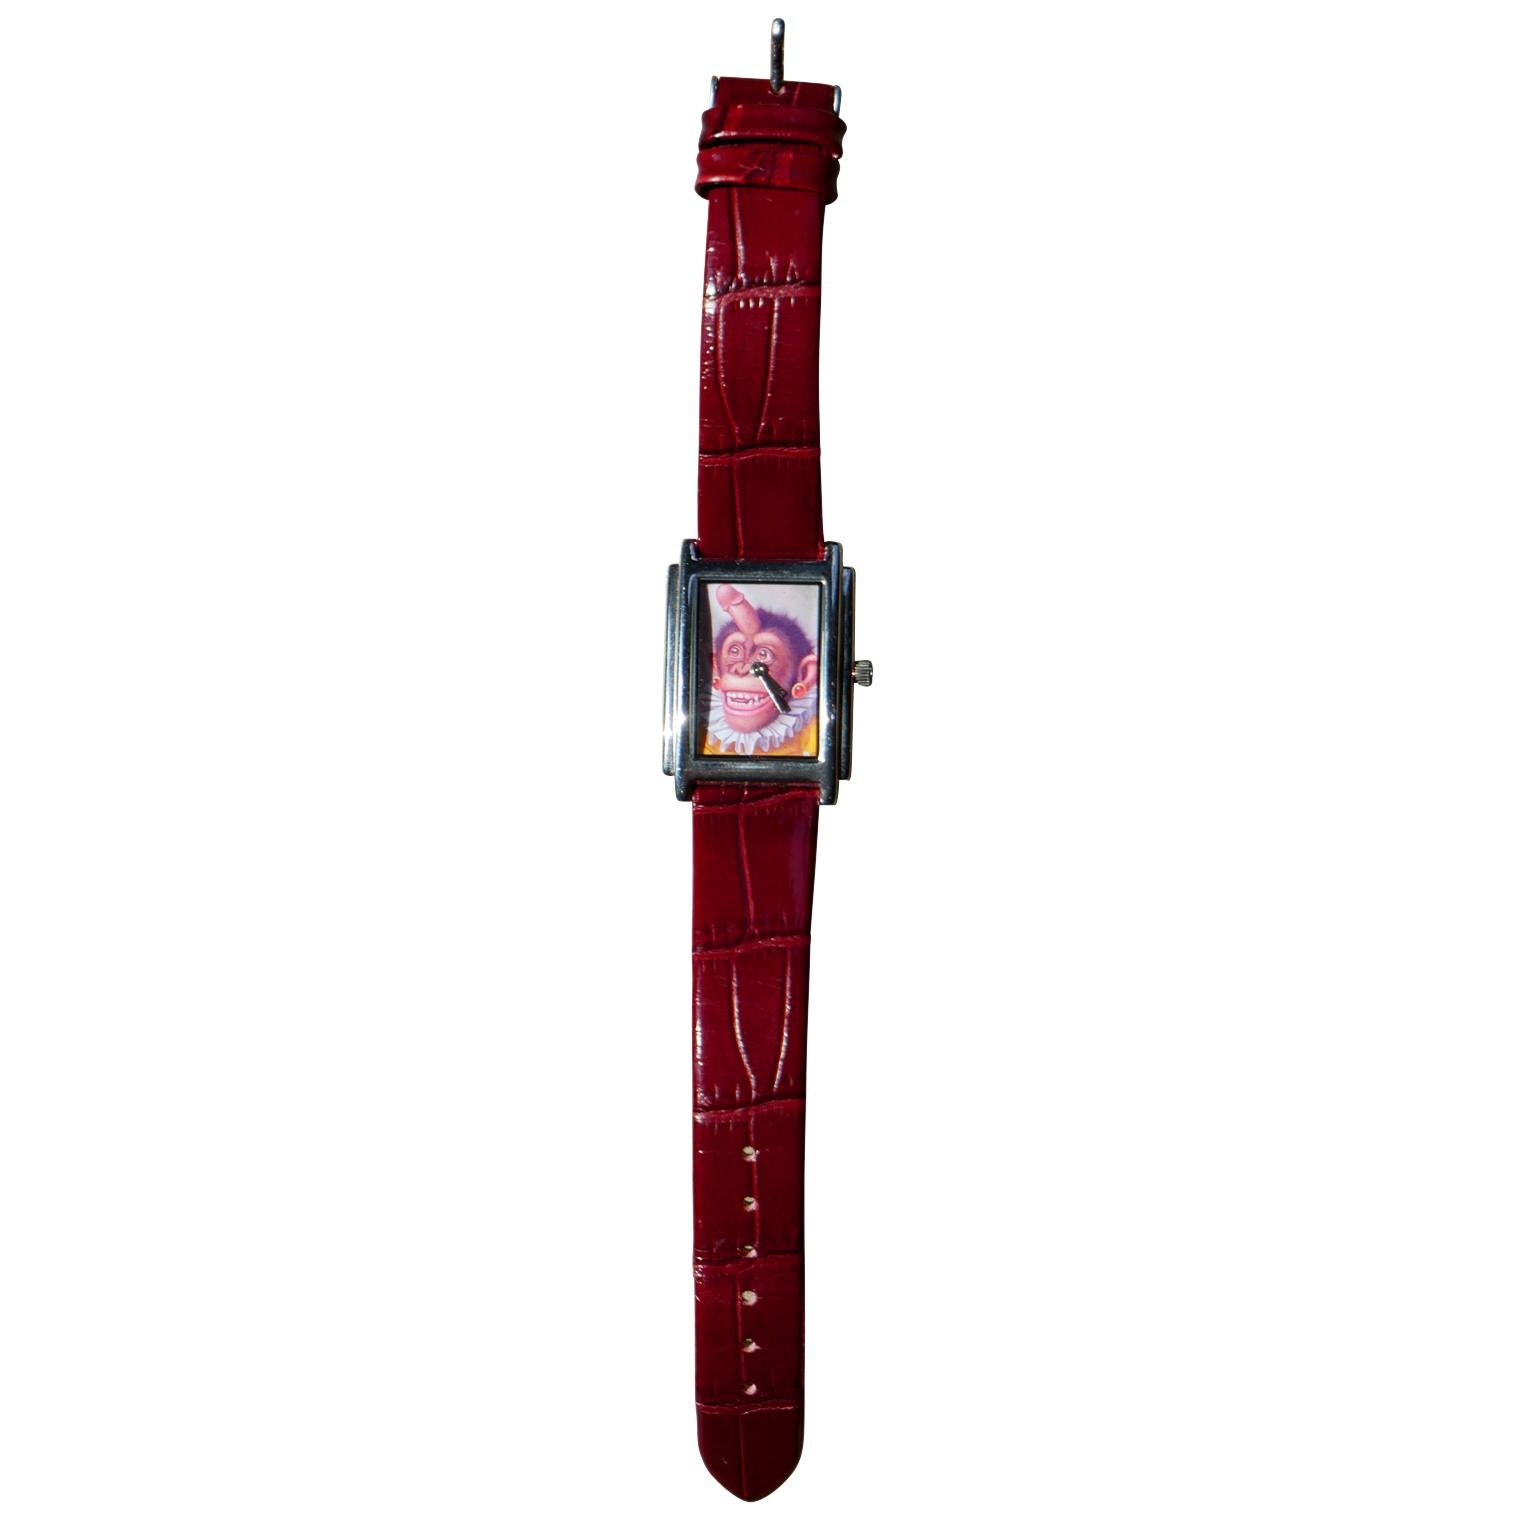 A modern watch by Donald Roller Wilson. The watch features a red patent leather and a dial that features a monkey with male genitalia on its head. The watch has silver metal accents and shows only very minimal wear. Unsigned but it includes a